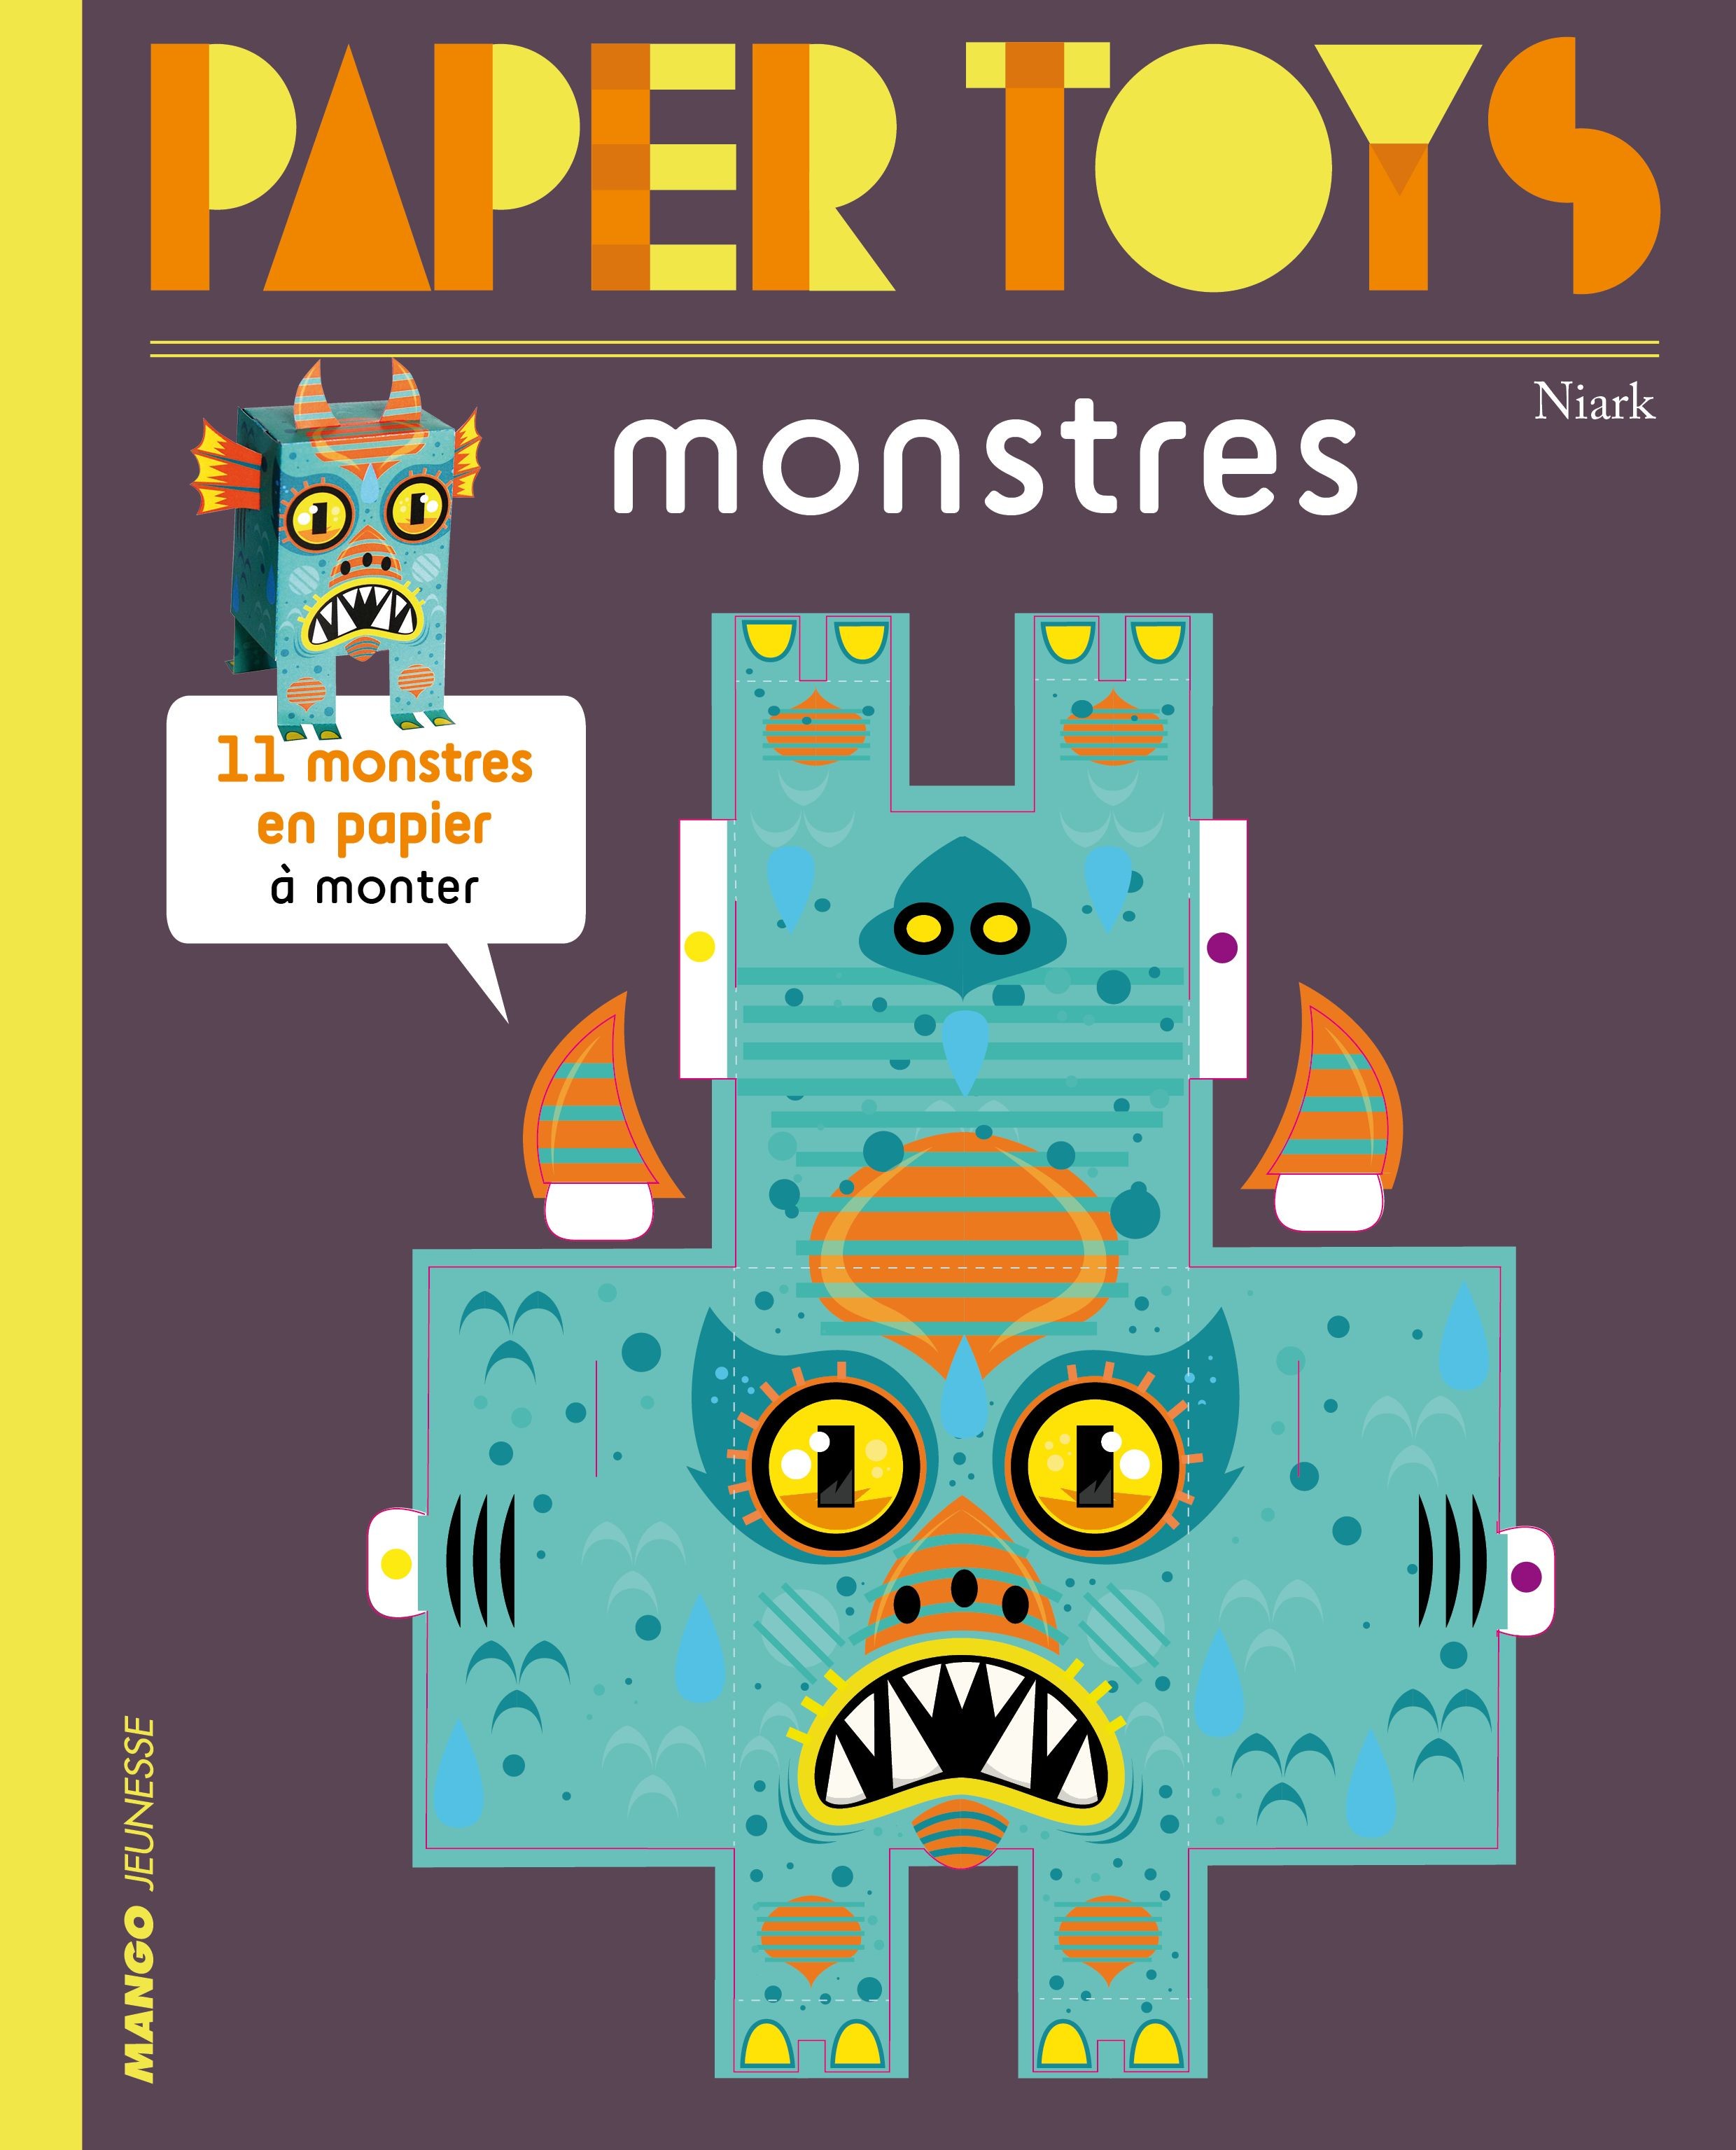 Papercraft toy Paper toys Monstres éditions Niark 8 50€